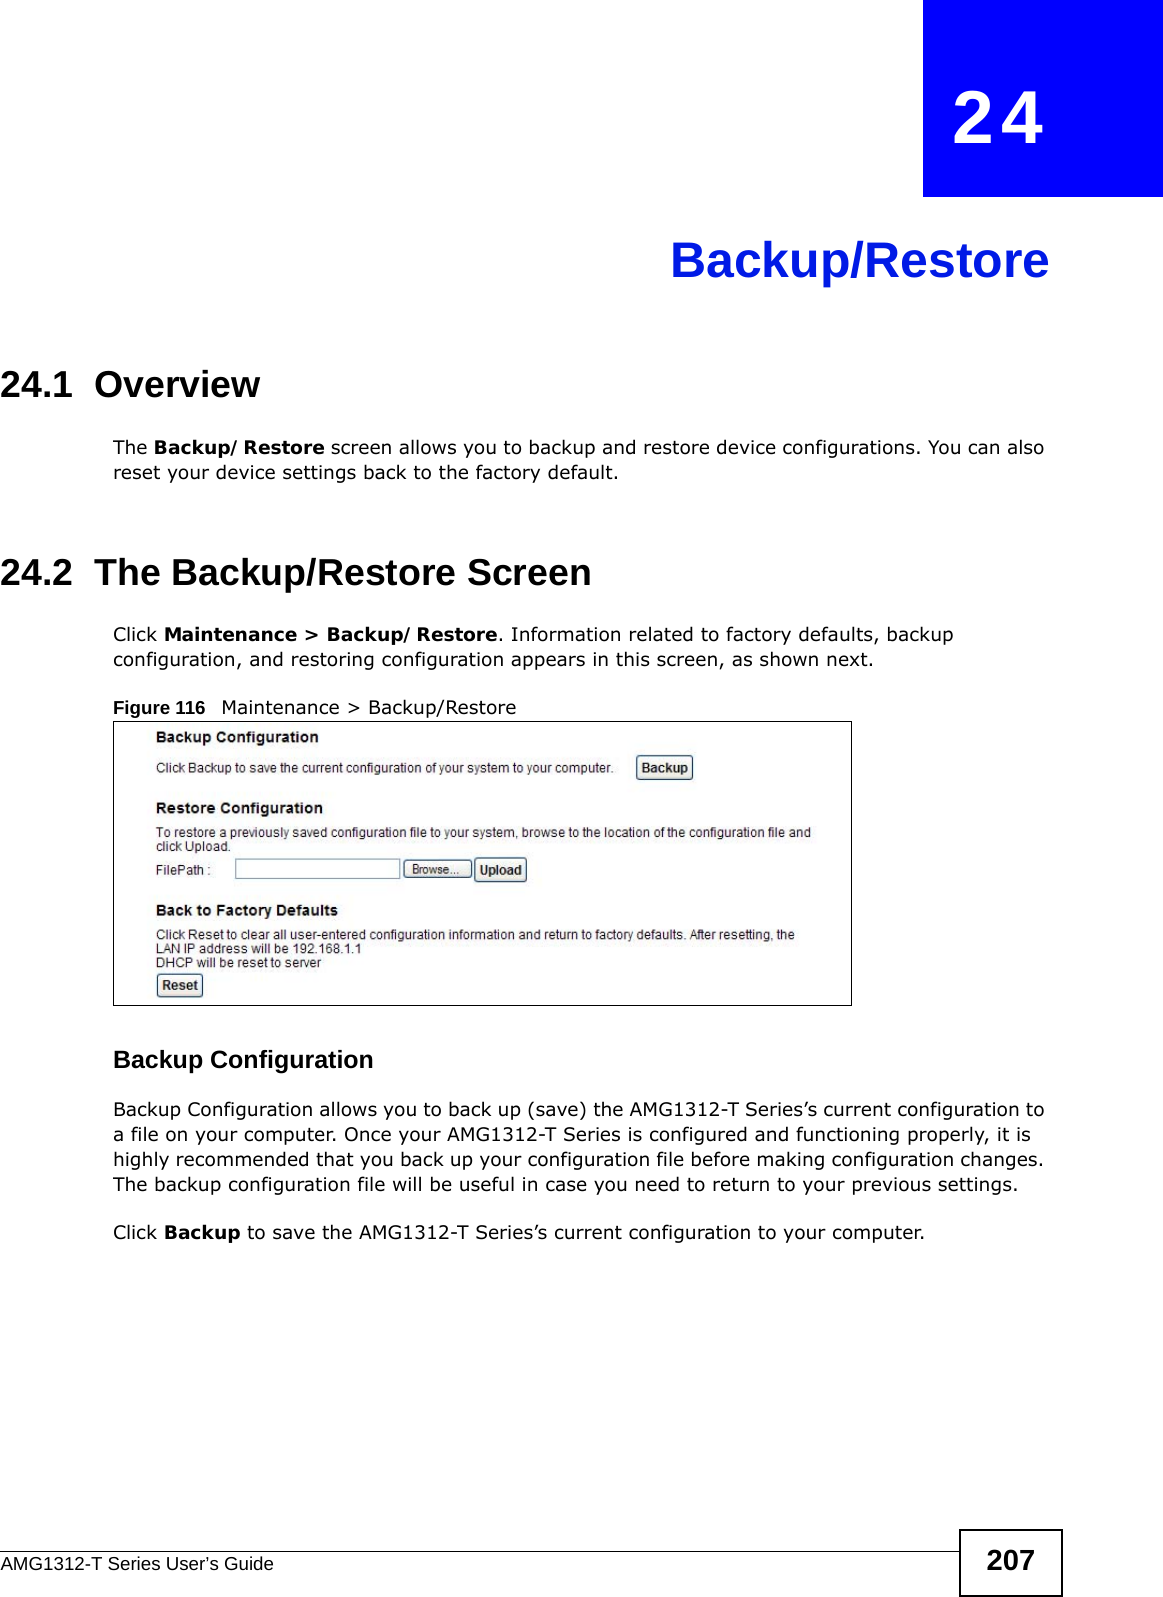 AMG1312-T Series User’s Guide 207CHAPTER   24Backup/Restore24.1  OverviewThe Backup/Restore screen allows you to backup and restore device configurations. You can also reset your device settings back to the factory default.24.2  The Backup/Restore Screen Click Maintenance &gt; Backup/Restore. Information related to factory defaults, backup configuration, and restoring configuration appears in this screen, as shown next.Figure 116   Maintenance &gt; Backup/RestoreBackup Configuration Backup Configuration allows you to back up (save) the AMG1312-T Series’s current configuration to a file on your computer. Once your AMG1312-T Series is configured and functioning properly, it is highly recommended that you back up your configuration file before making configuration changes. The backup configuration file will be useful in case you need to return to your previous settings. Click Backup to save the AMG1312-T Series’s current configuration to your computer.